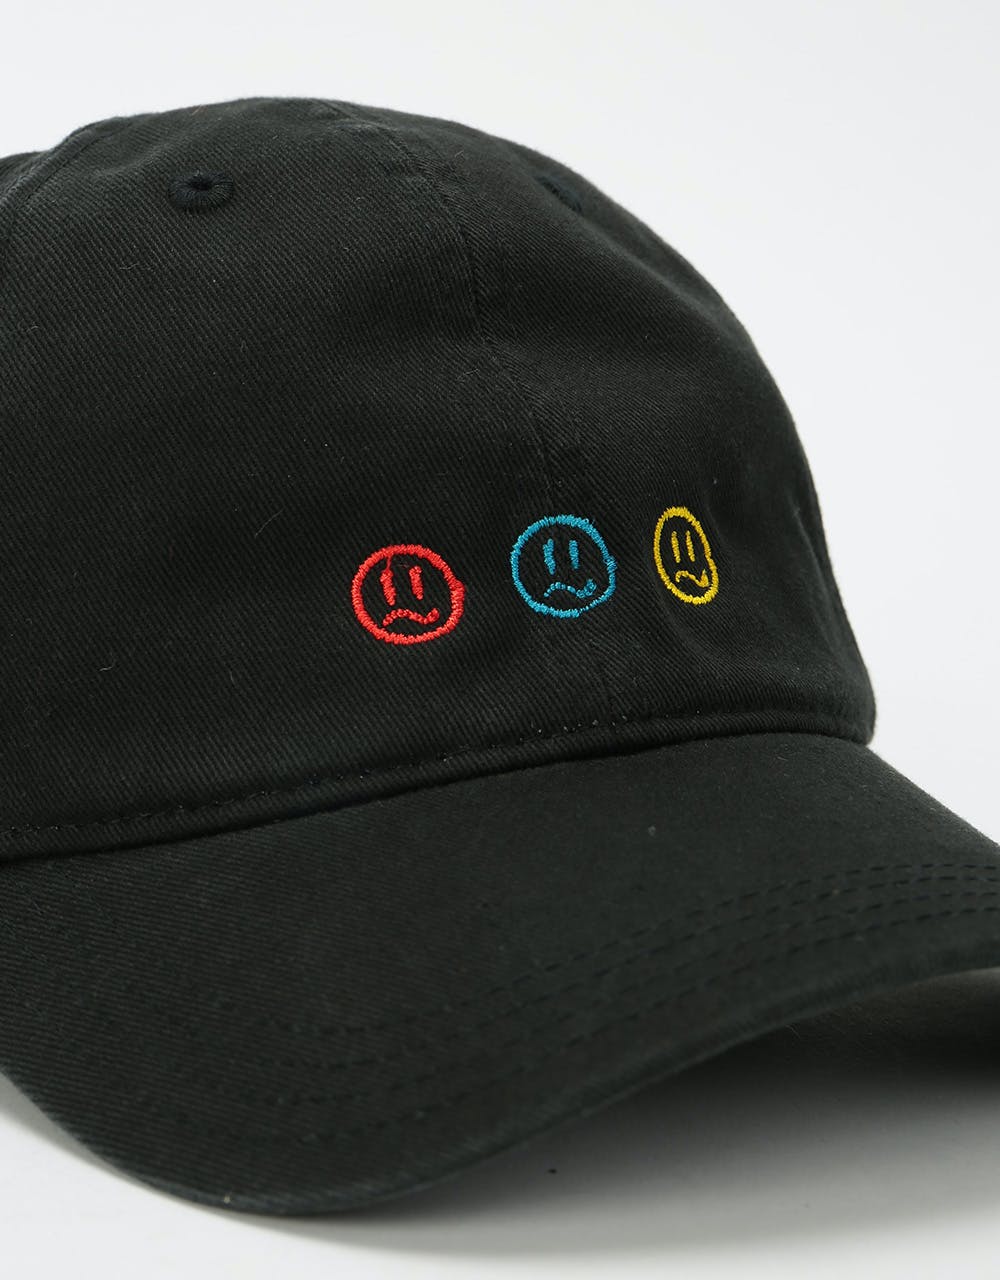 Route One Wonky Cap - Black